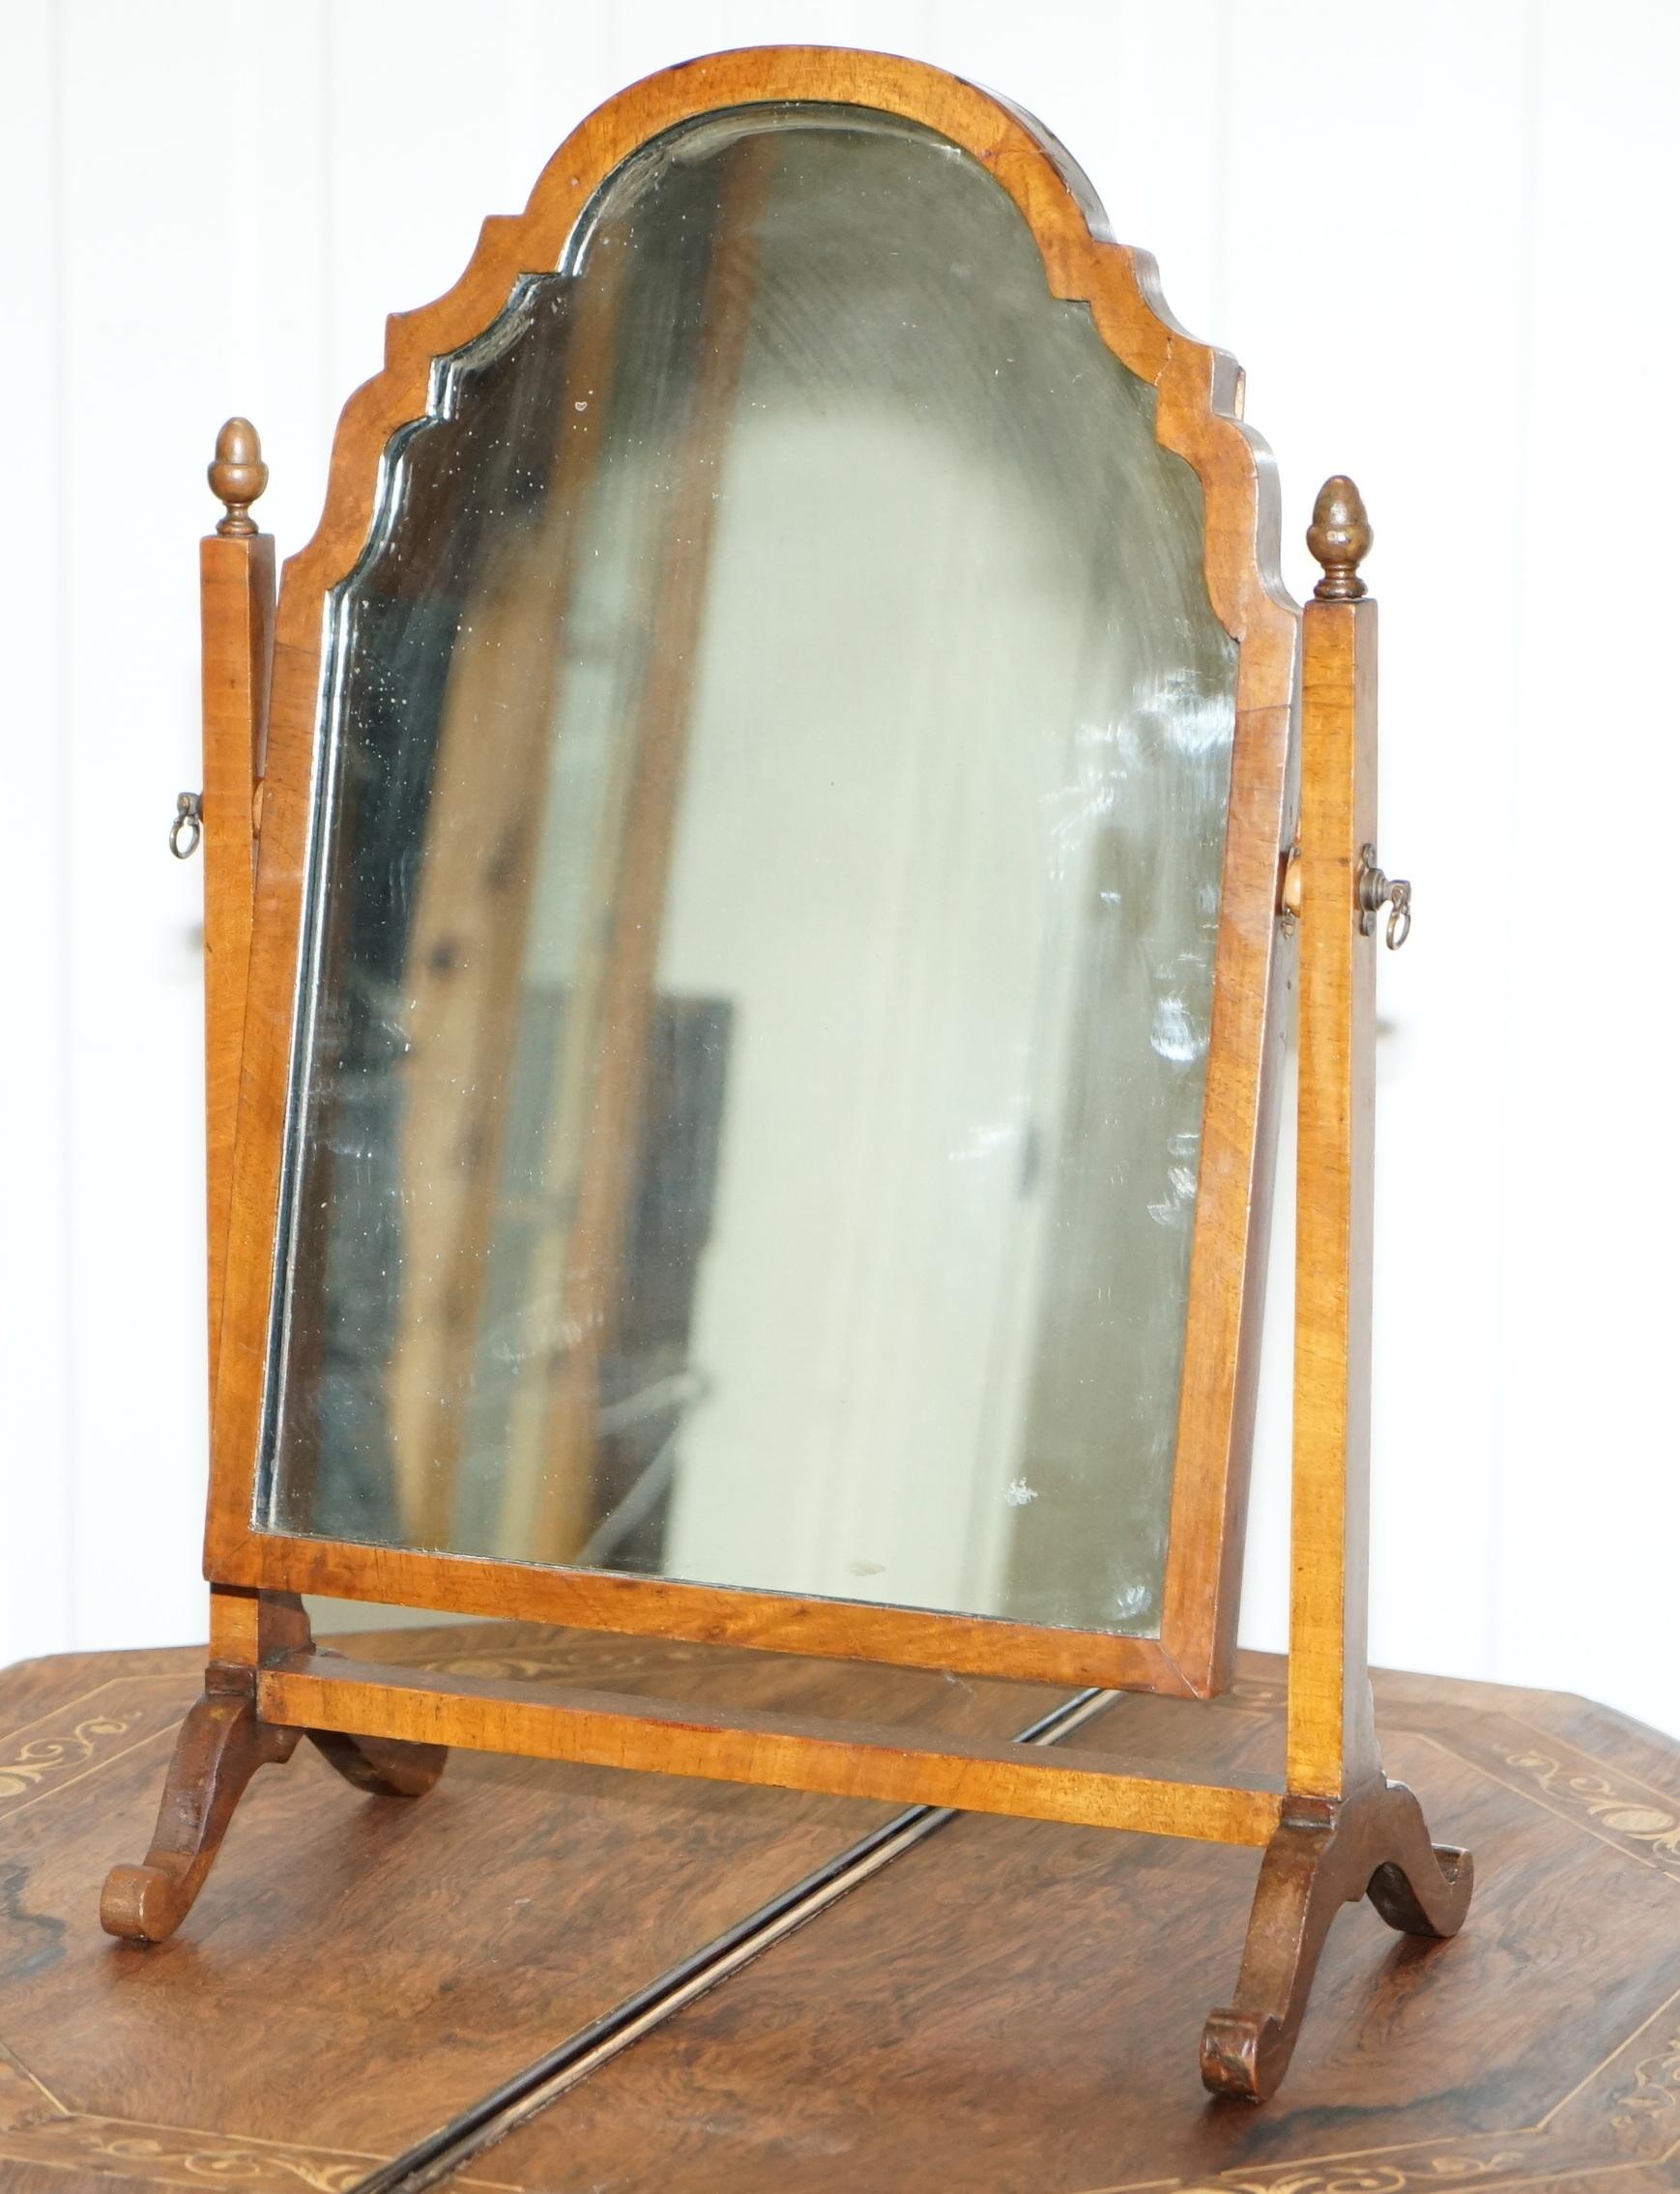 We are delighted to offer for sale this lovely tabletop Georgian Walnut toilet, dressing table bathroom mirror

Please note the delivery fee listed is just a guide, it covers within the M25 only.

A very good looking decorative mirror with